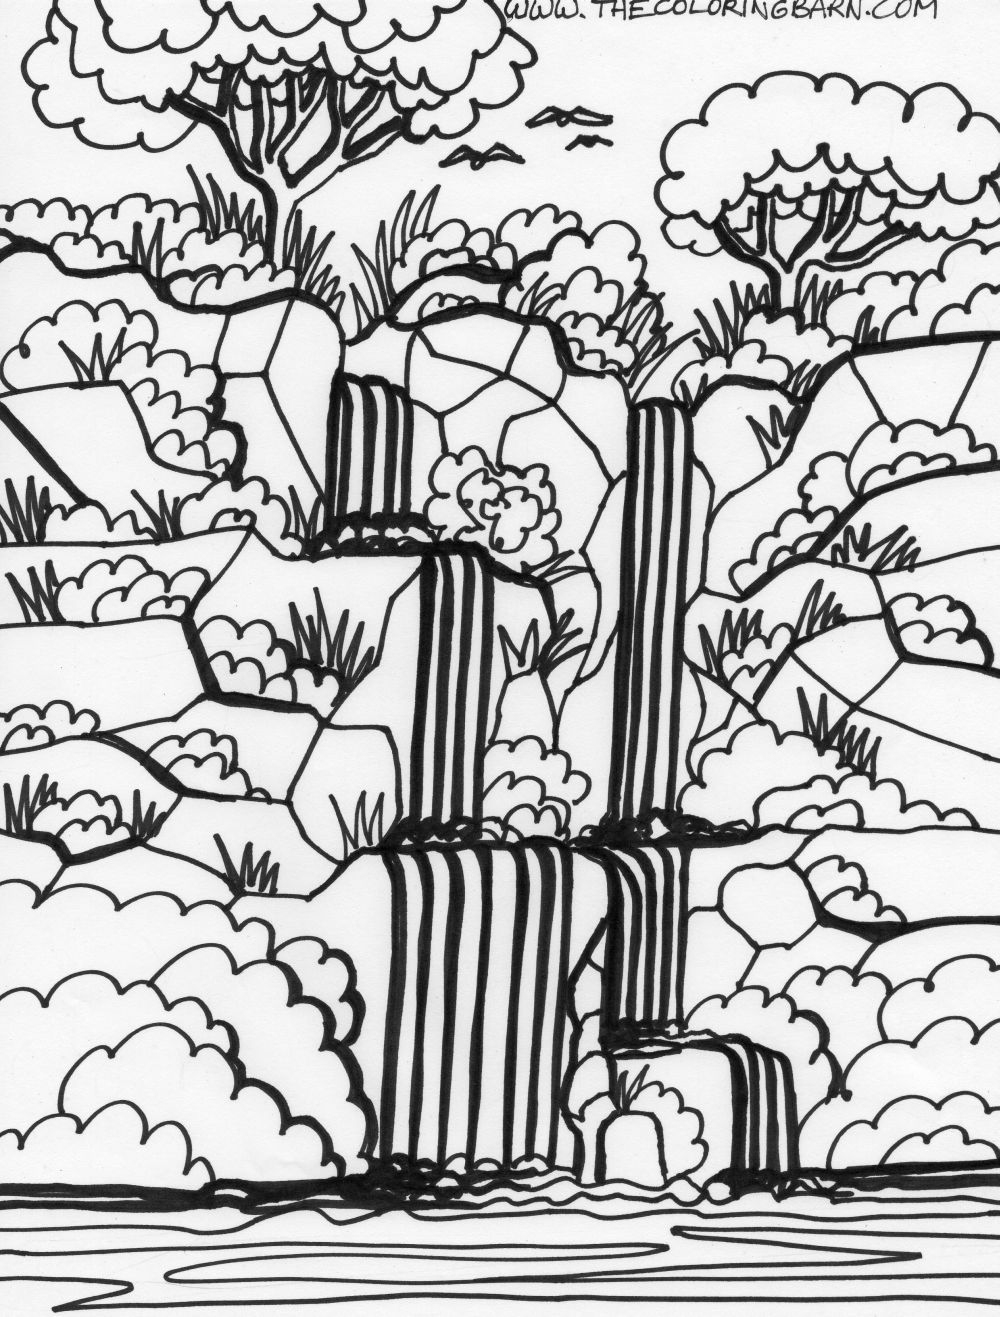 Amazon Rainforest Coloring Pages For Kids | Free Download Coloring - Free Printable Waterfall Coloring Pages